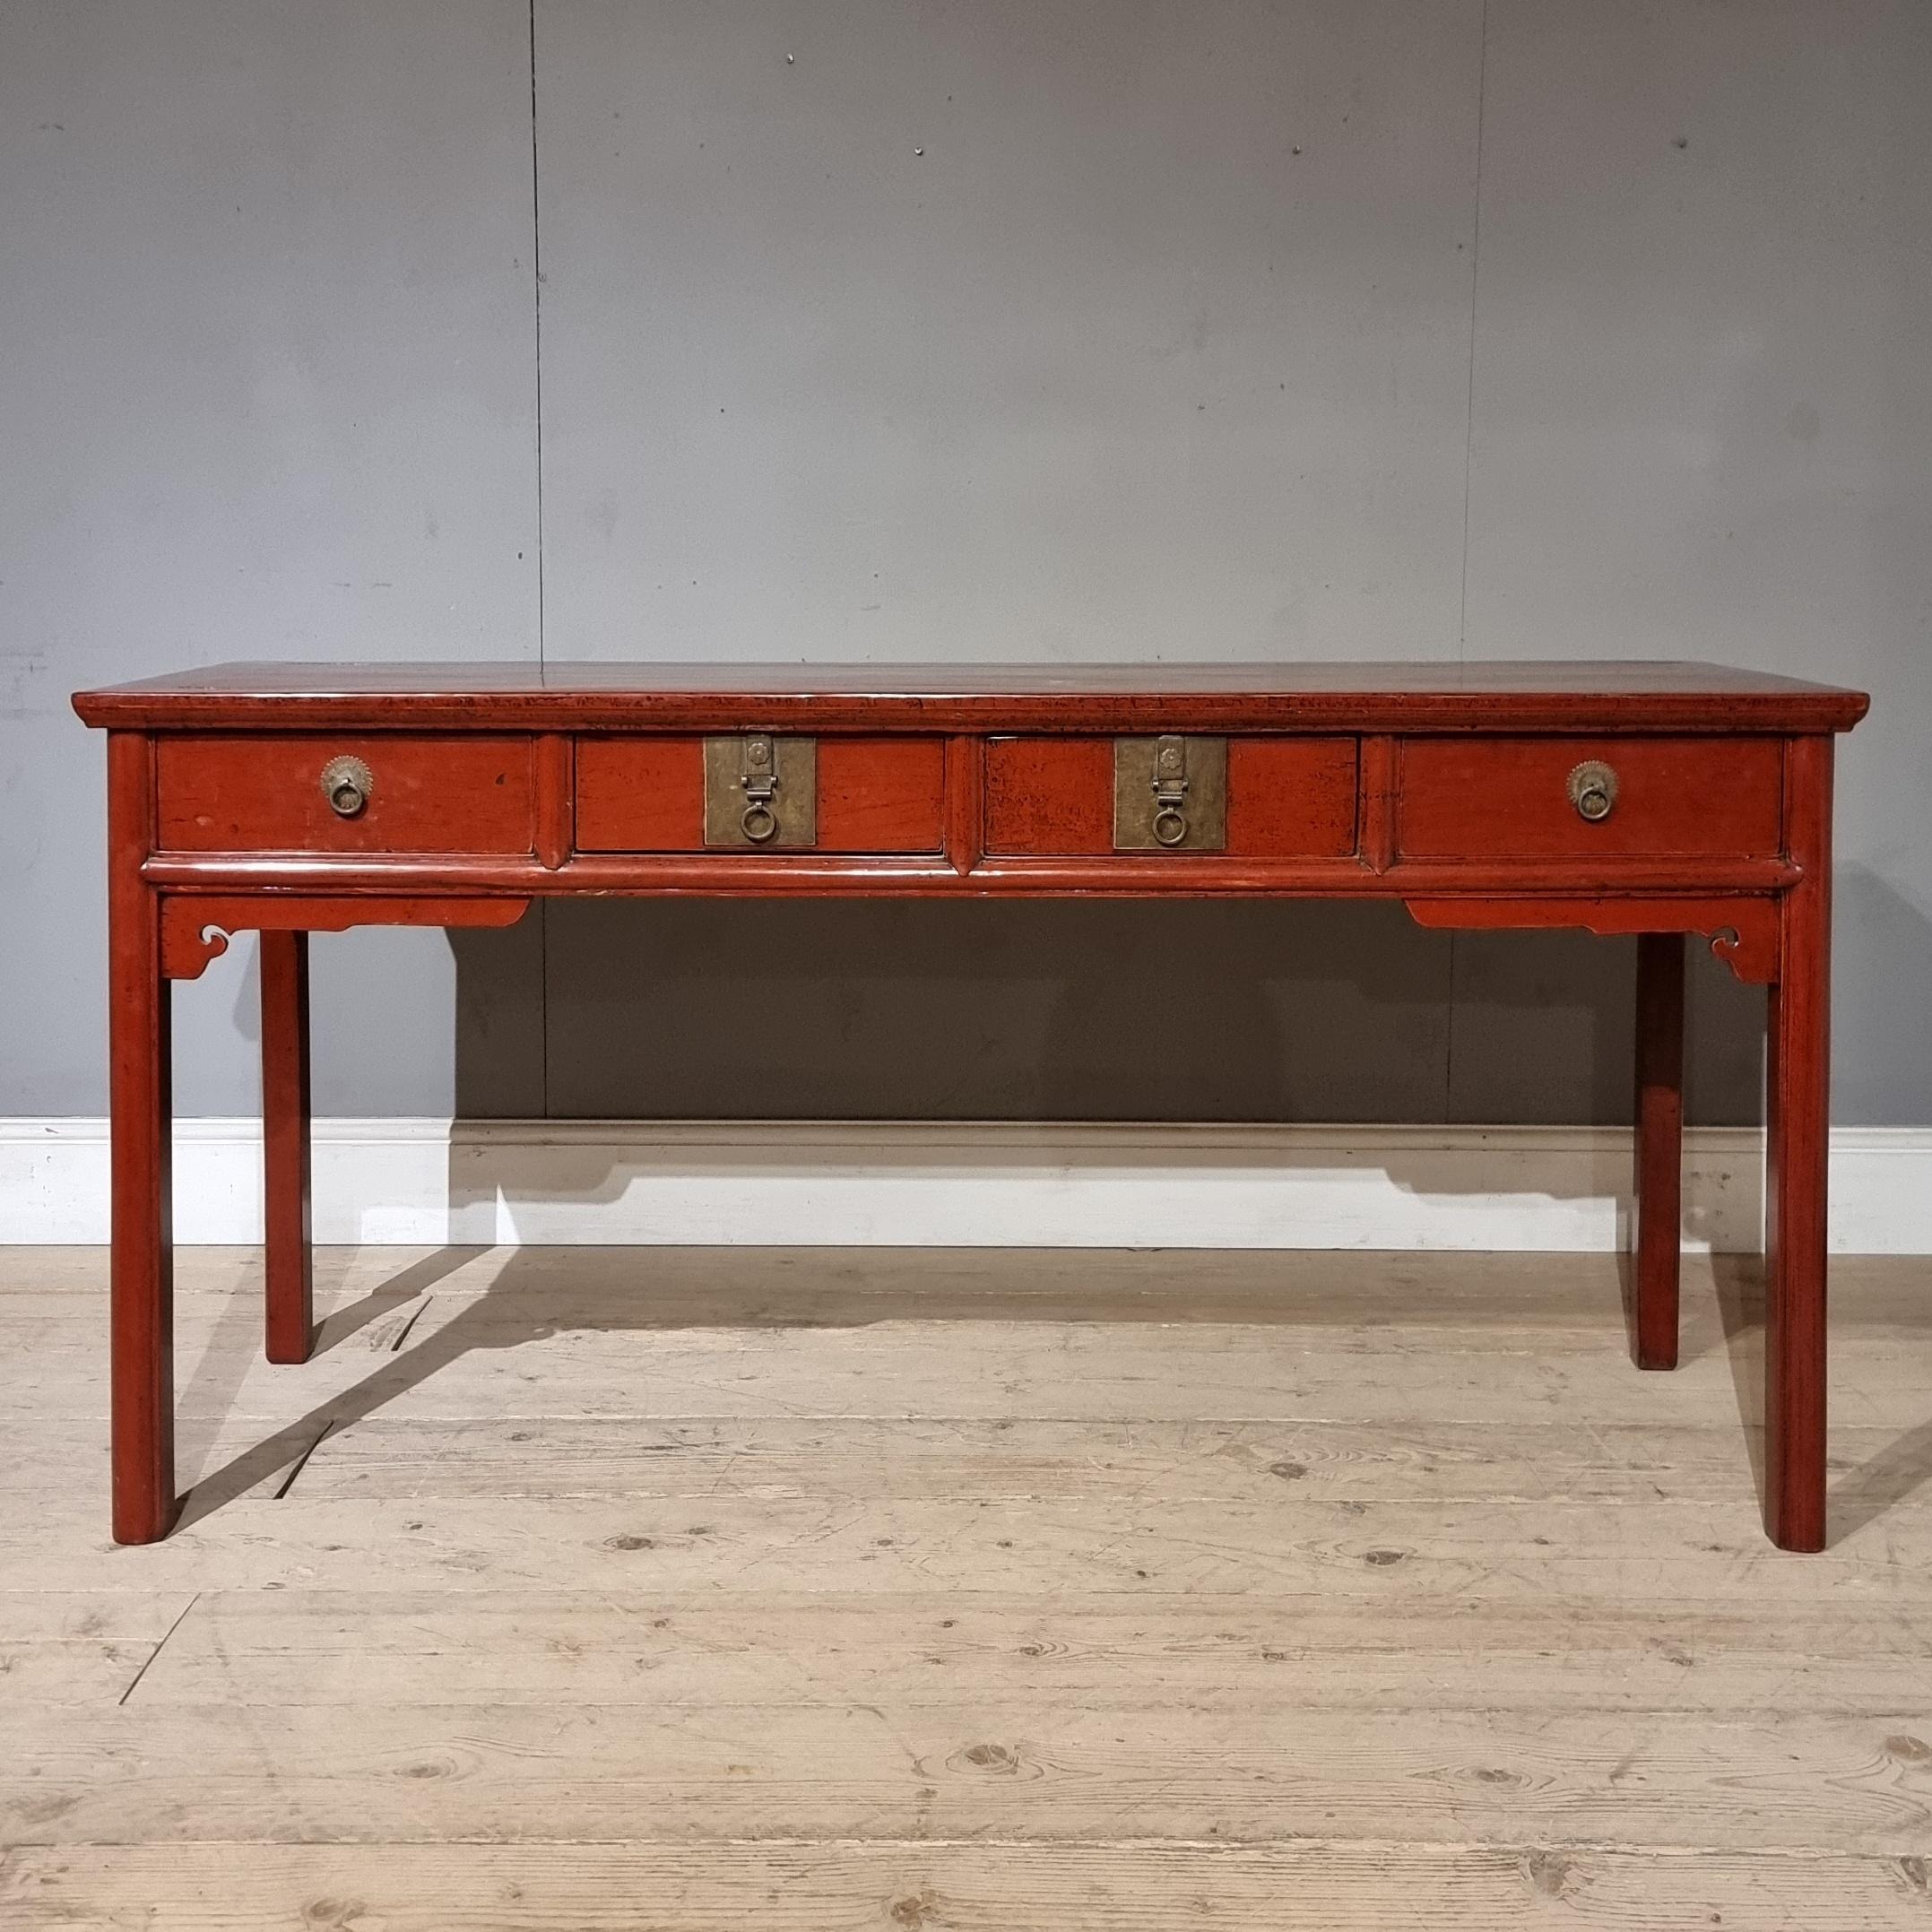 Late 19th C Chinese red lacquered 4 drawer server. 1890

Dimensions
65.5 inches (166 cms) wide
22 inches (56 cms) deep
32 inches (81 cms) high.

    